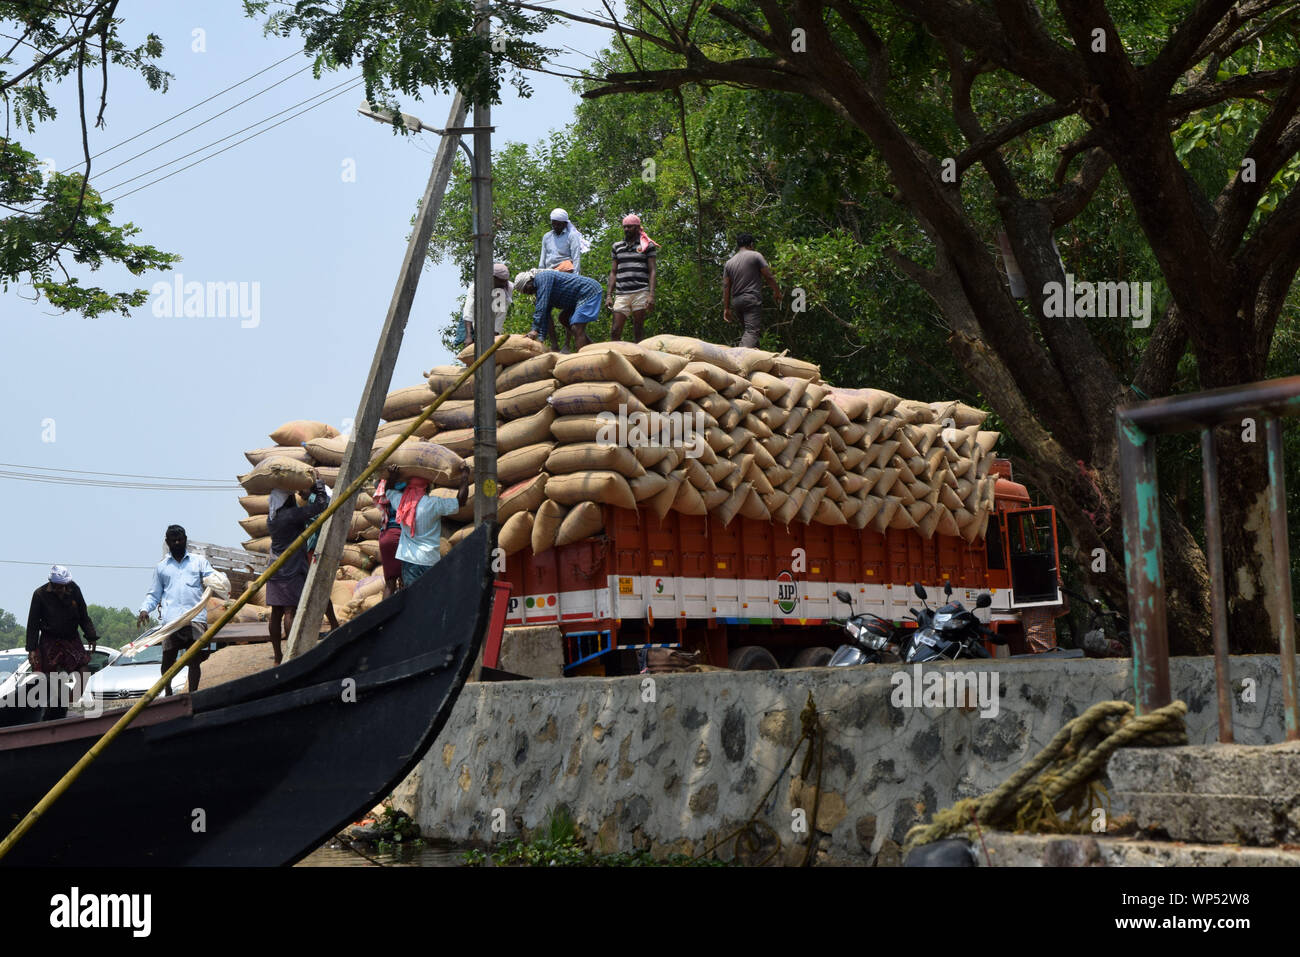 Lorry deliver sacks of rice, Alleppey, Kerala, India Stock Photo